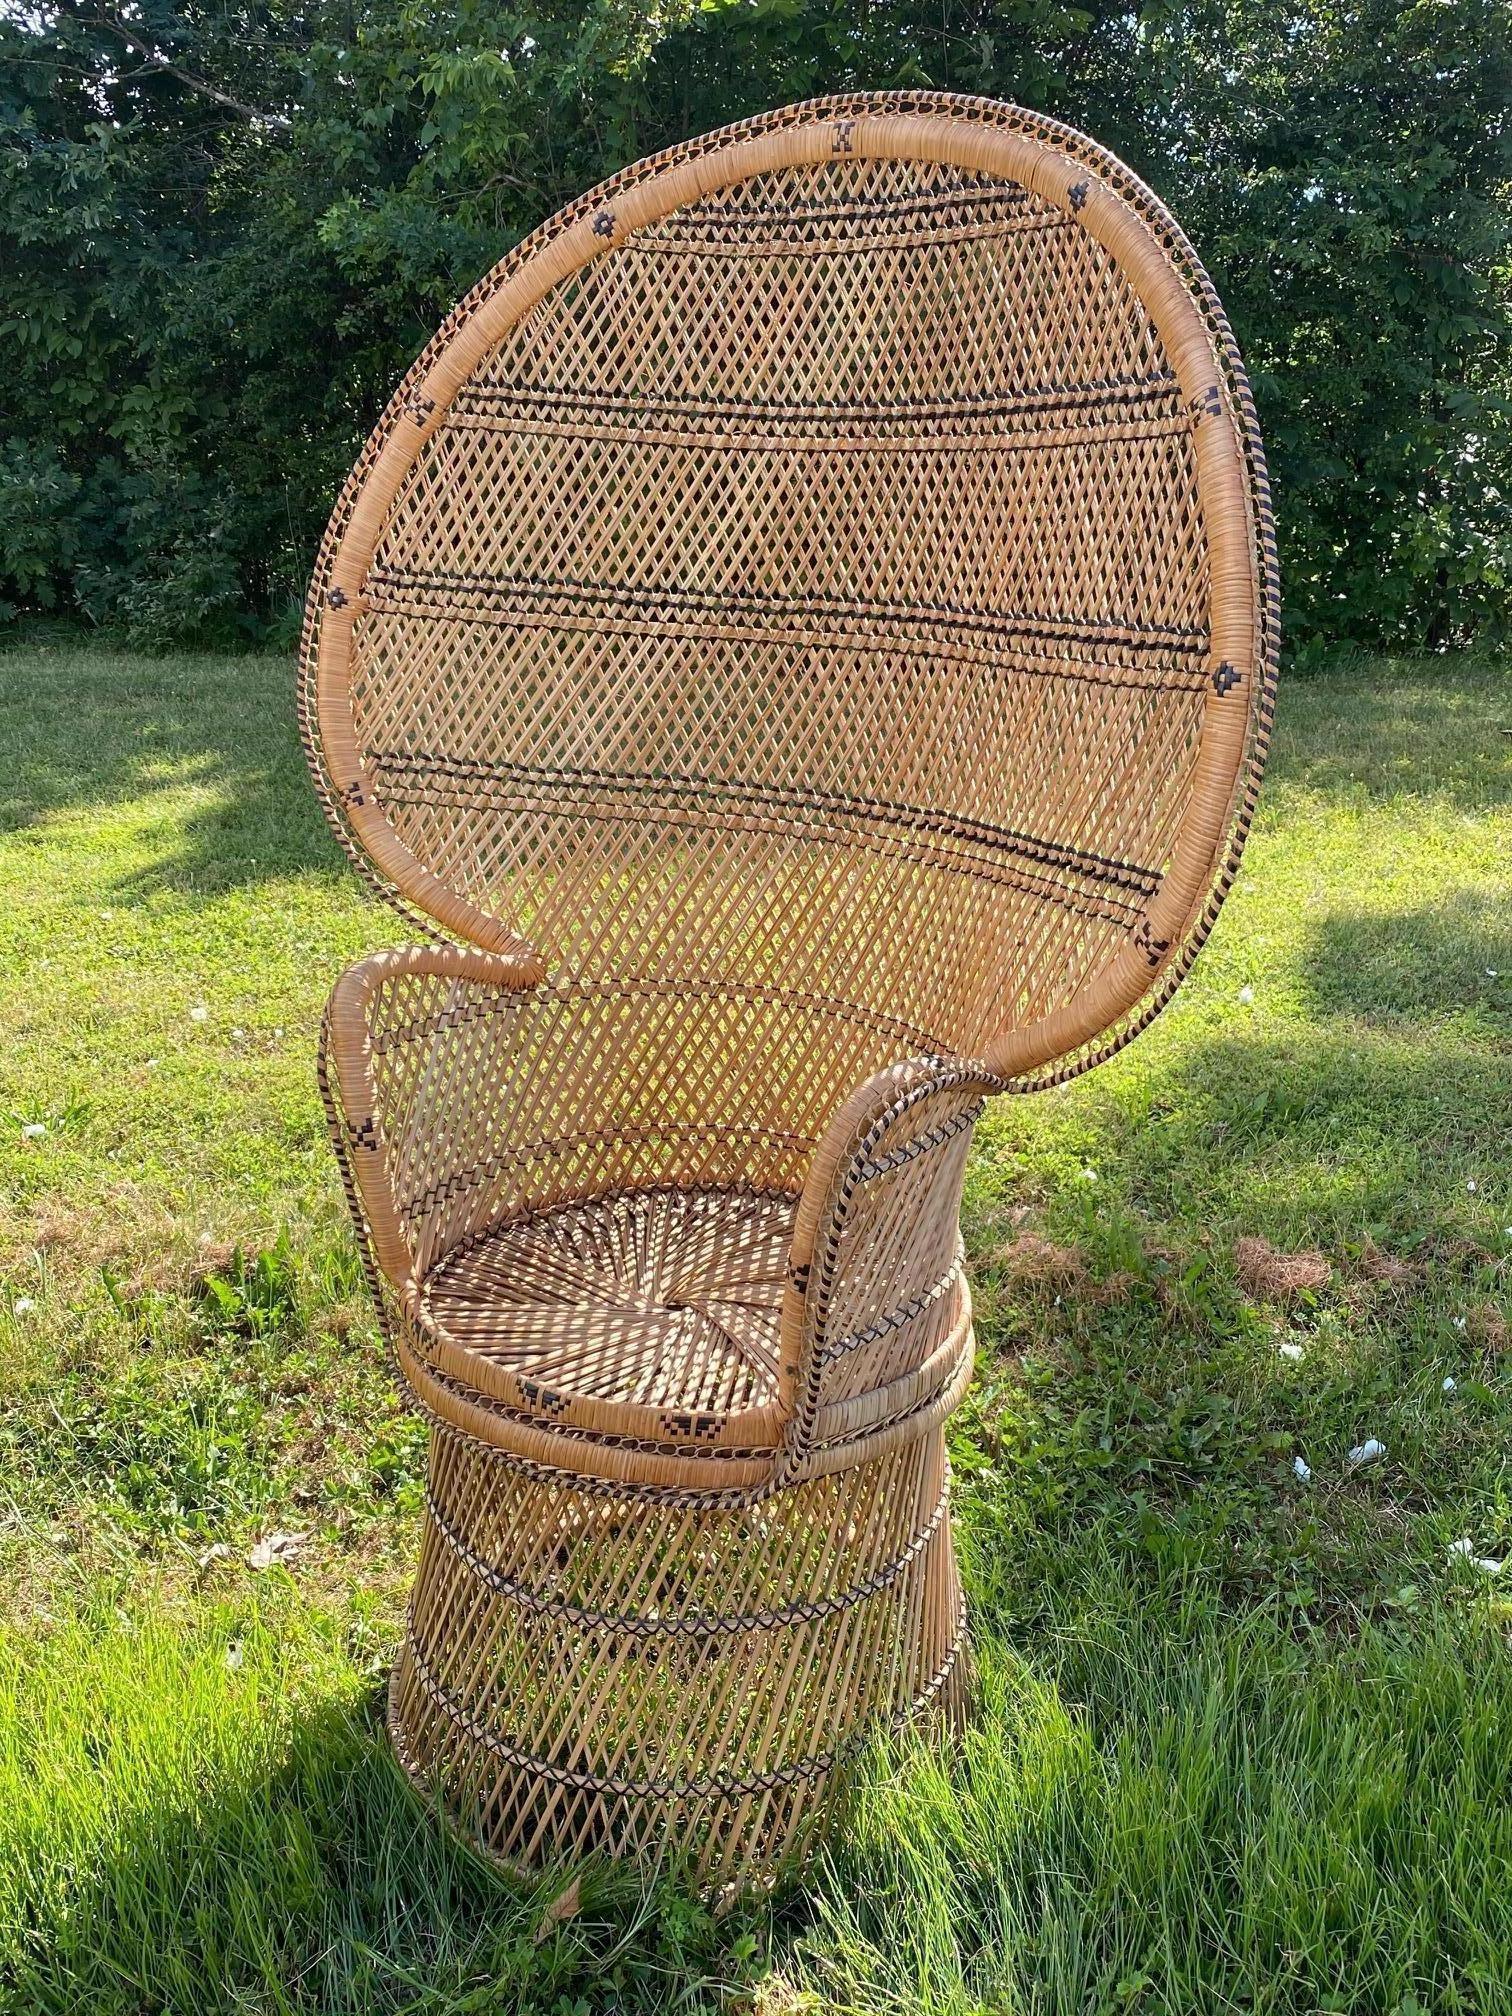 Iconic Vintage Wicker and Woven Rattan Peacock Chair 2